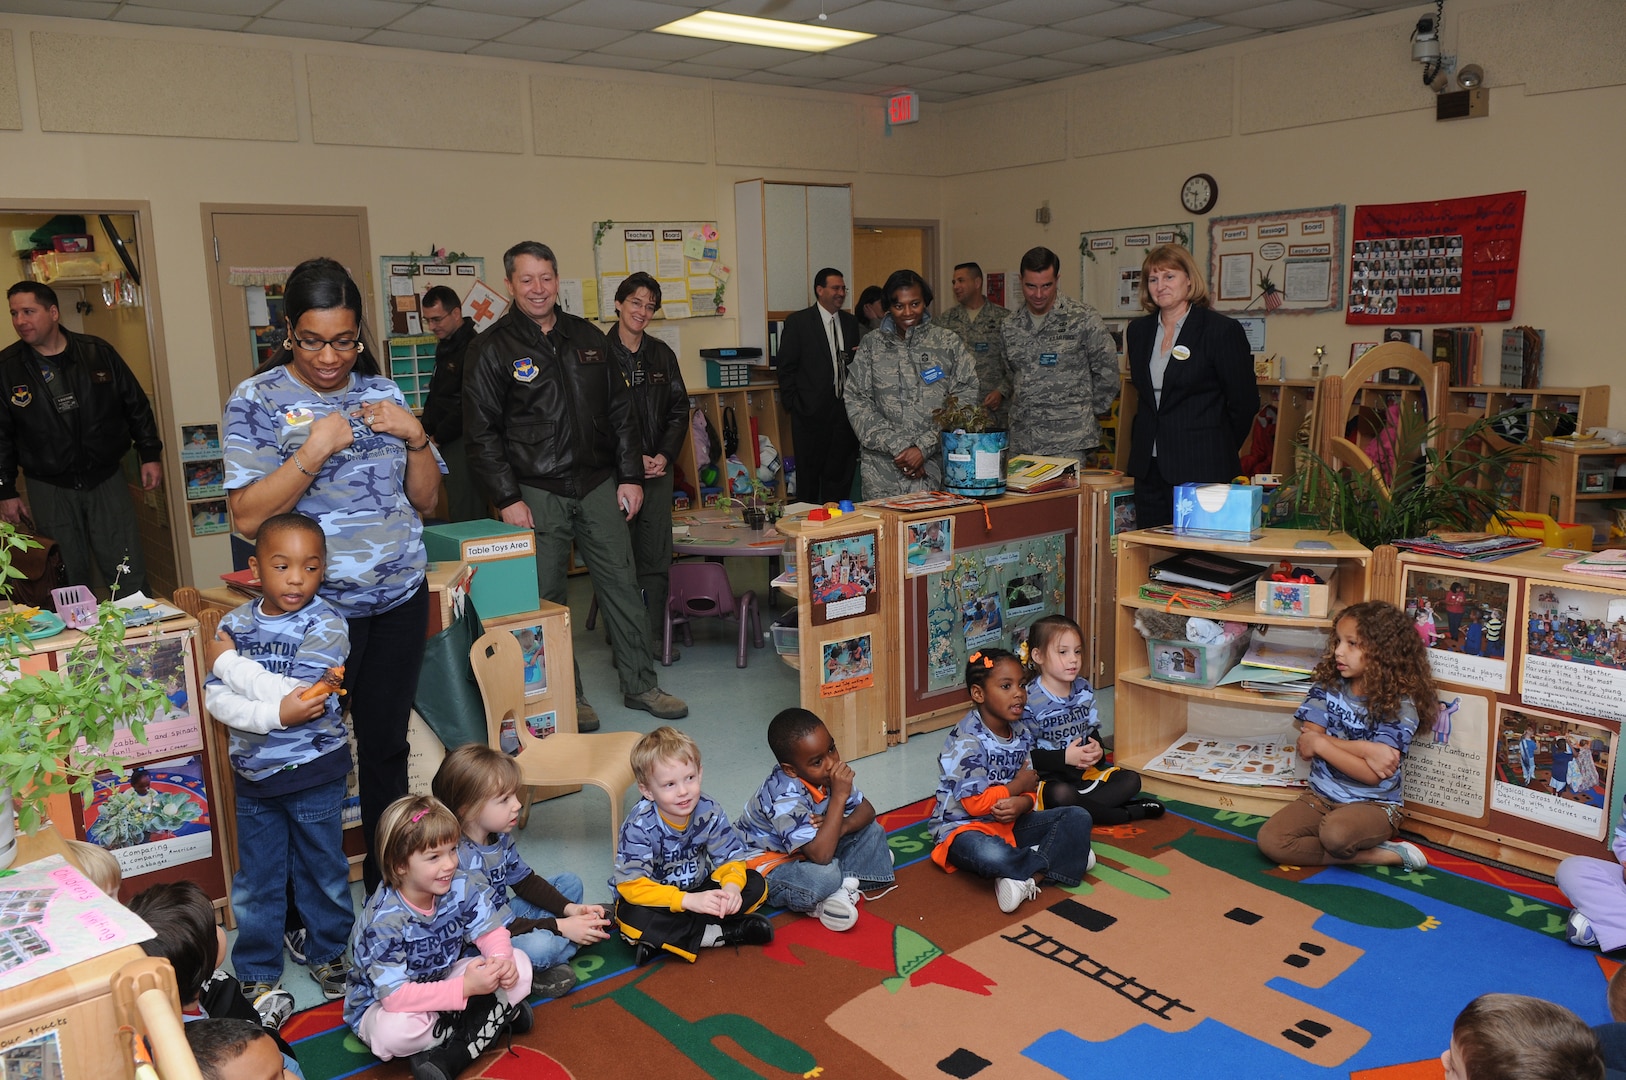 Maj. Gen. Gregory Feest, 19th Air Force commander, and Col. Jacqueline Van Ovost, 12th Flying Training Wing commander (left center), visit with staff and children at the child development center. General Feest visited several areas of the 12th Flying Training Wing Jan. 29-30 to learn more about the wing and its Airmen. (U.S. Air Force photo by Joel Martinez)